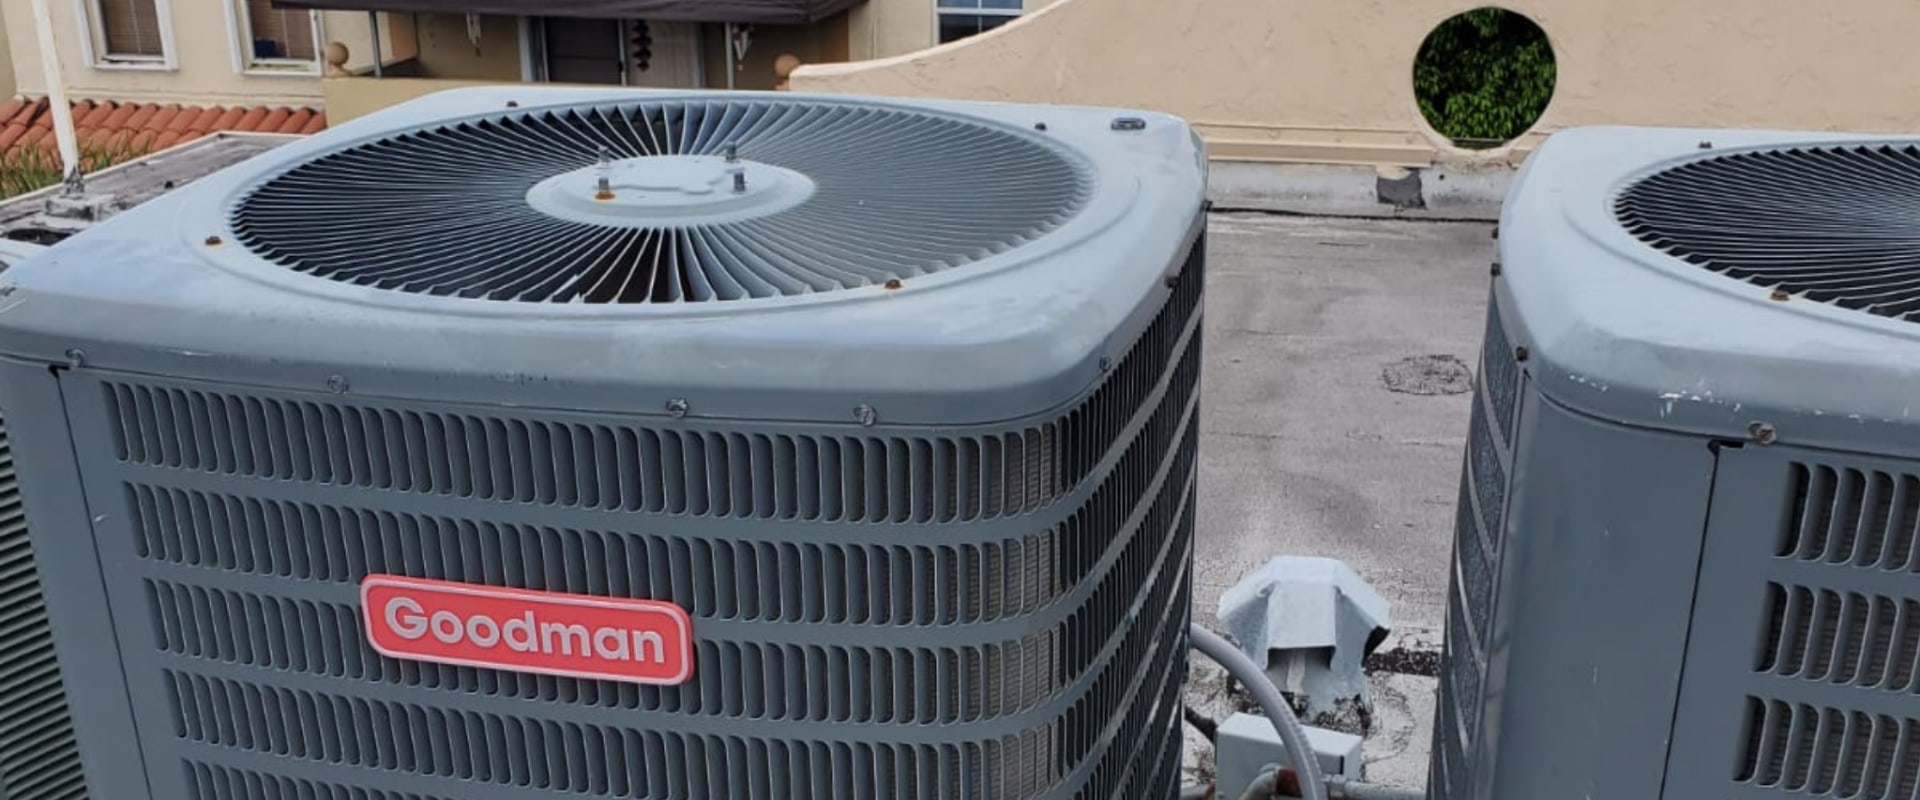 Timely HVAC Air Conditioning Repair Services In Aventura FL